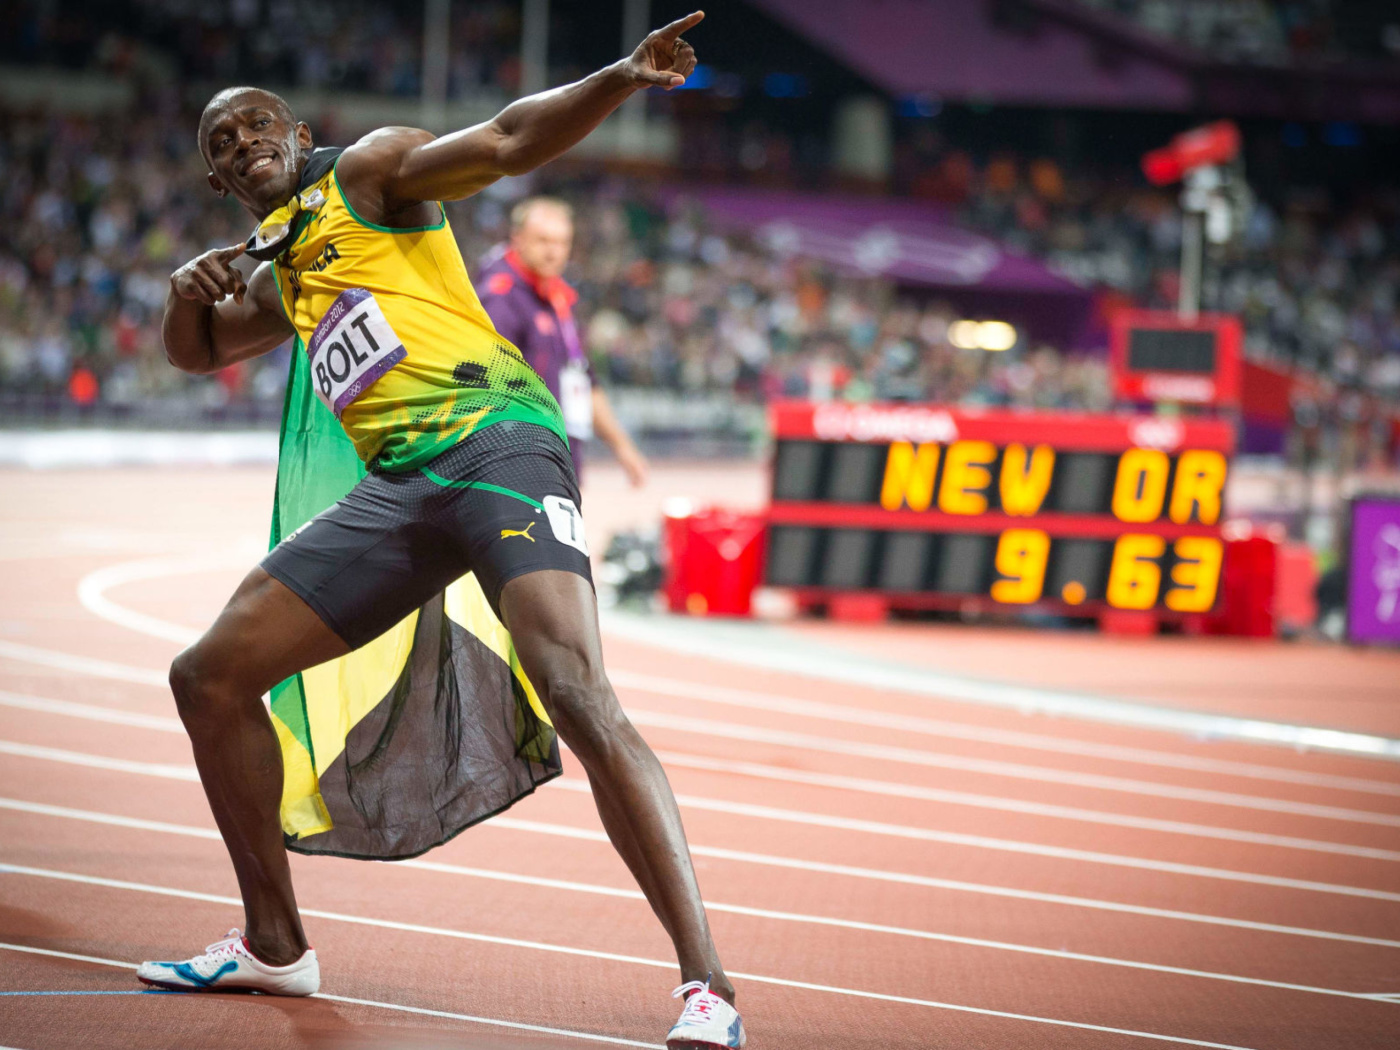 Usain Bolt won medals in the Olympics wallpaper 1400x1050